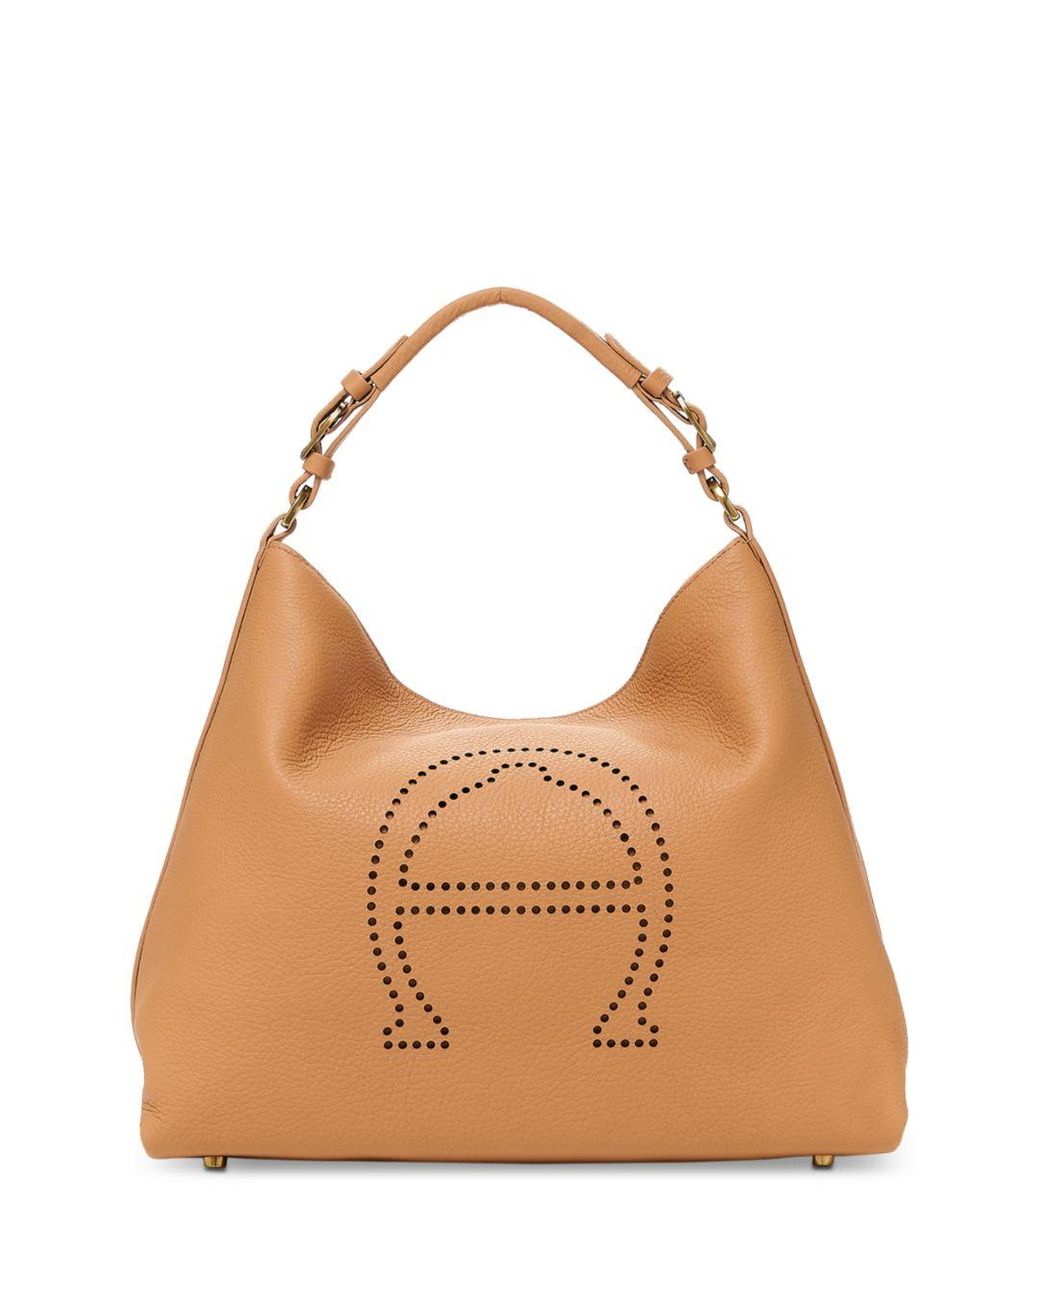 Etienne Aigner Stella Large Leather Hobo in Brown | Lyst